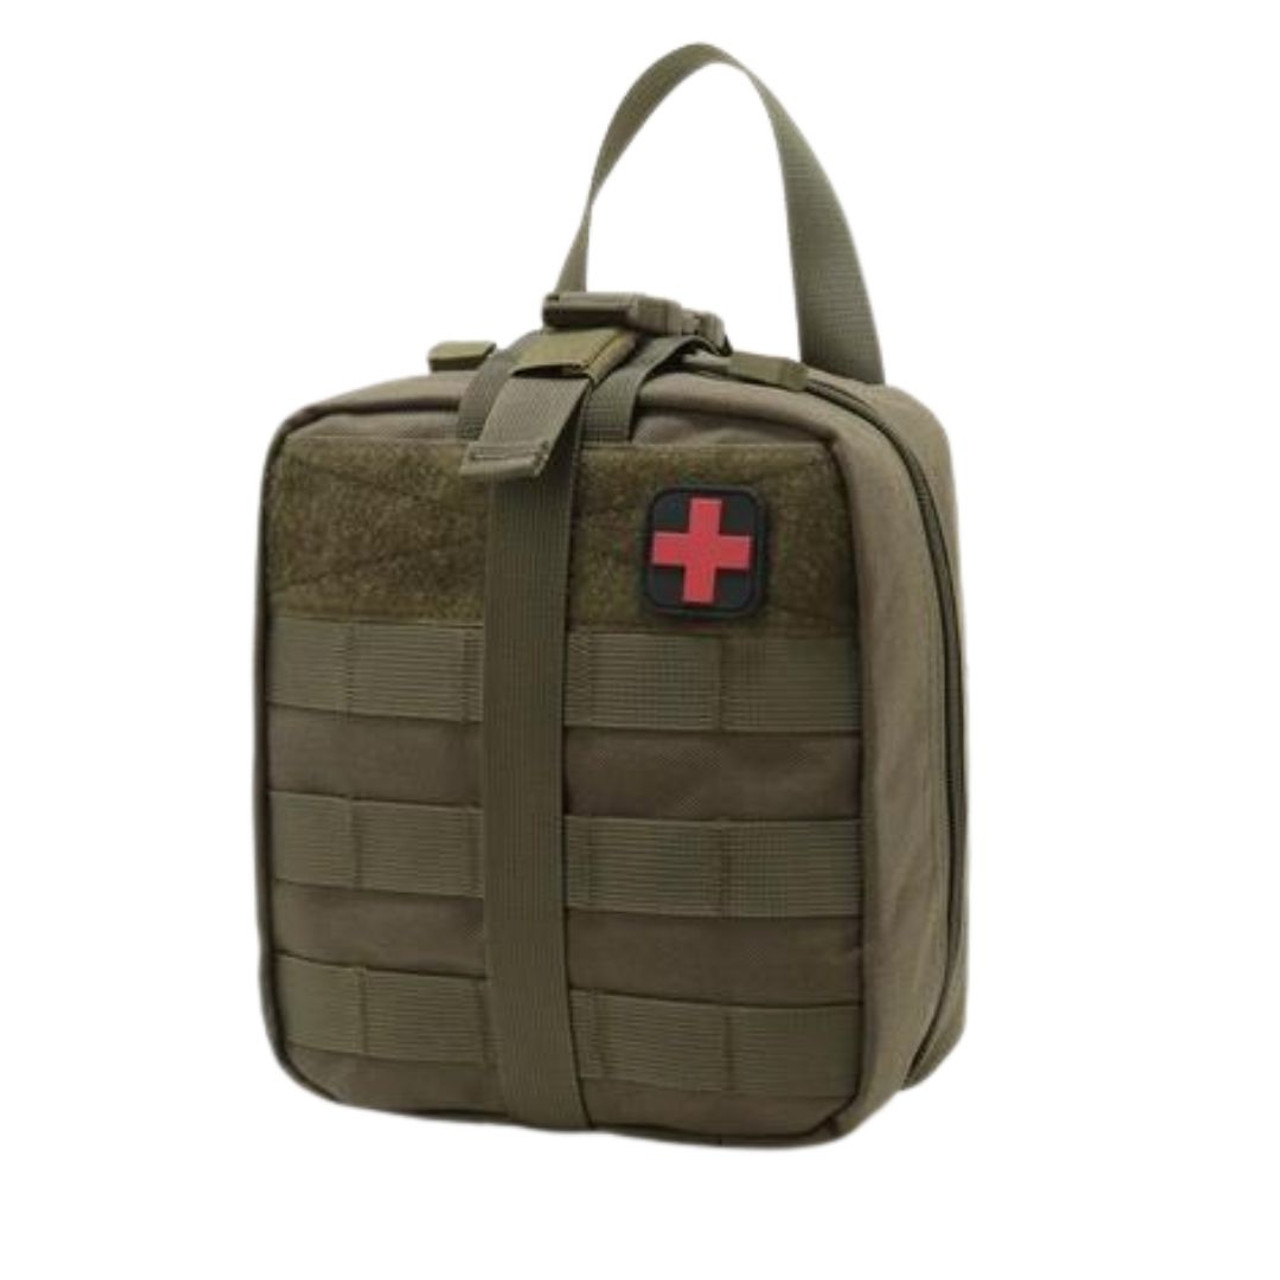 R&B Inside MOLLE Pouch Clear Front